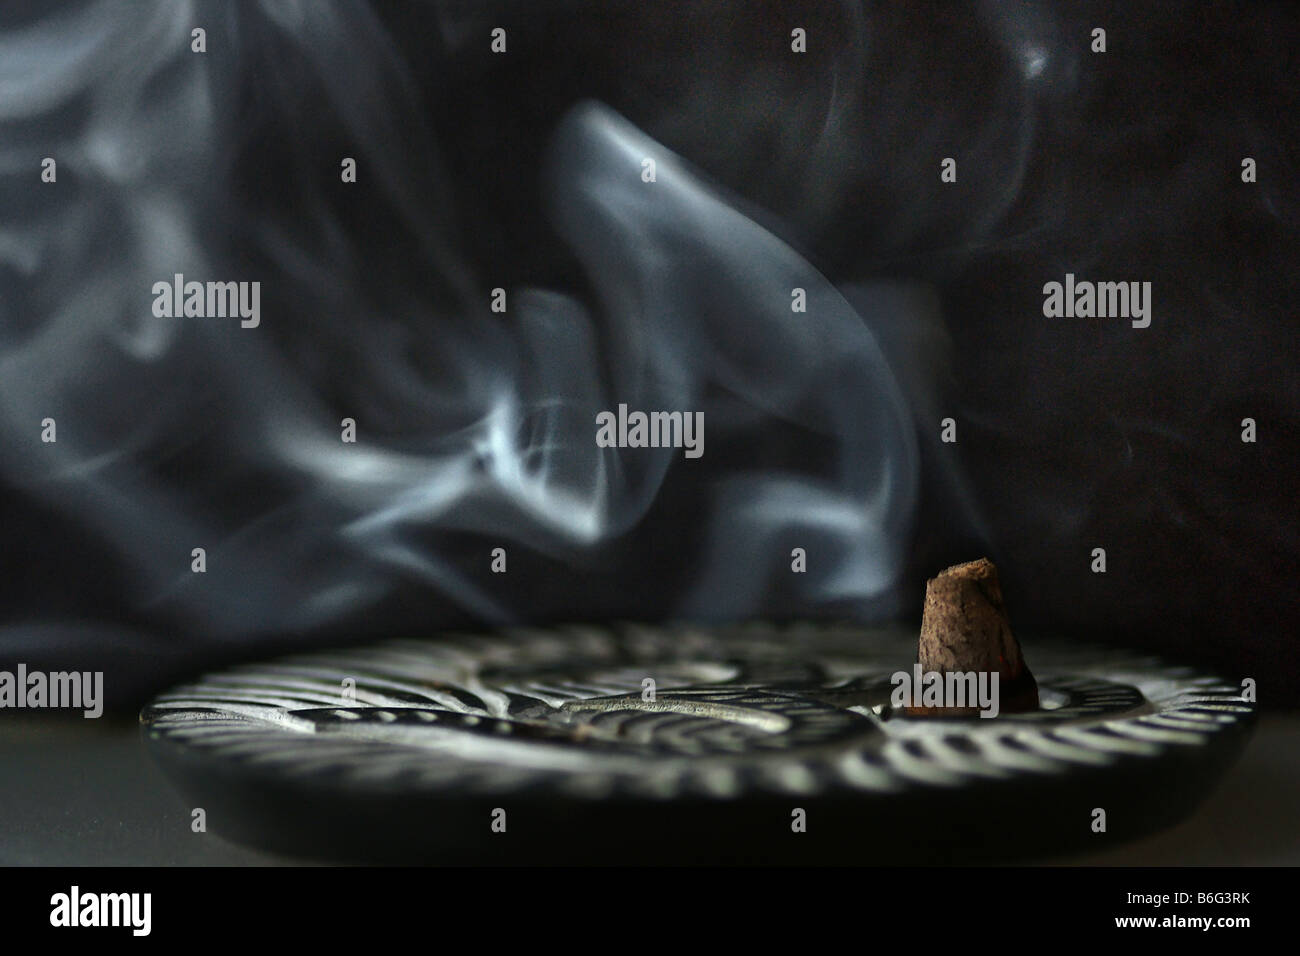 Tranquil incense smoke plume salvia divinorum smudge abstraction burning on small plate on black background Stock Photo